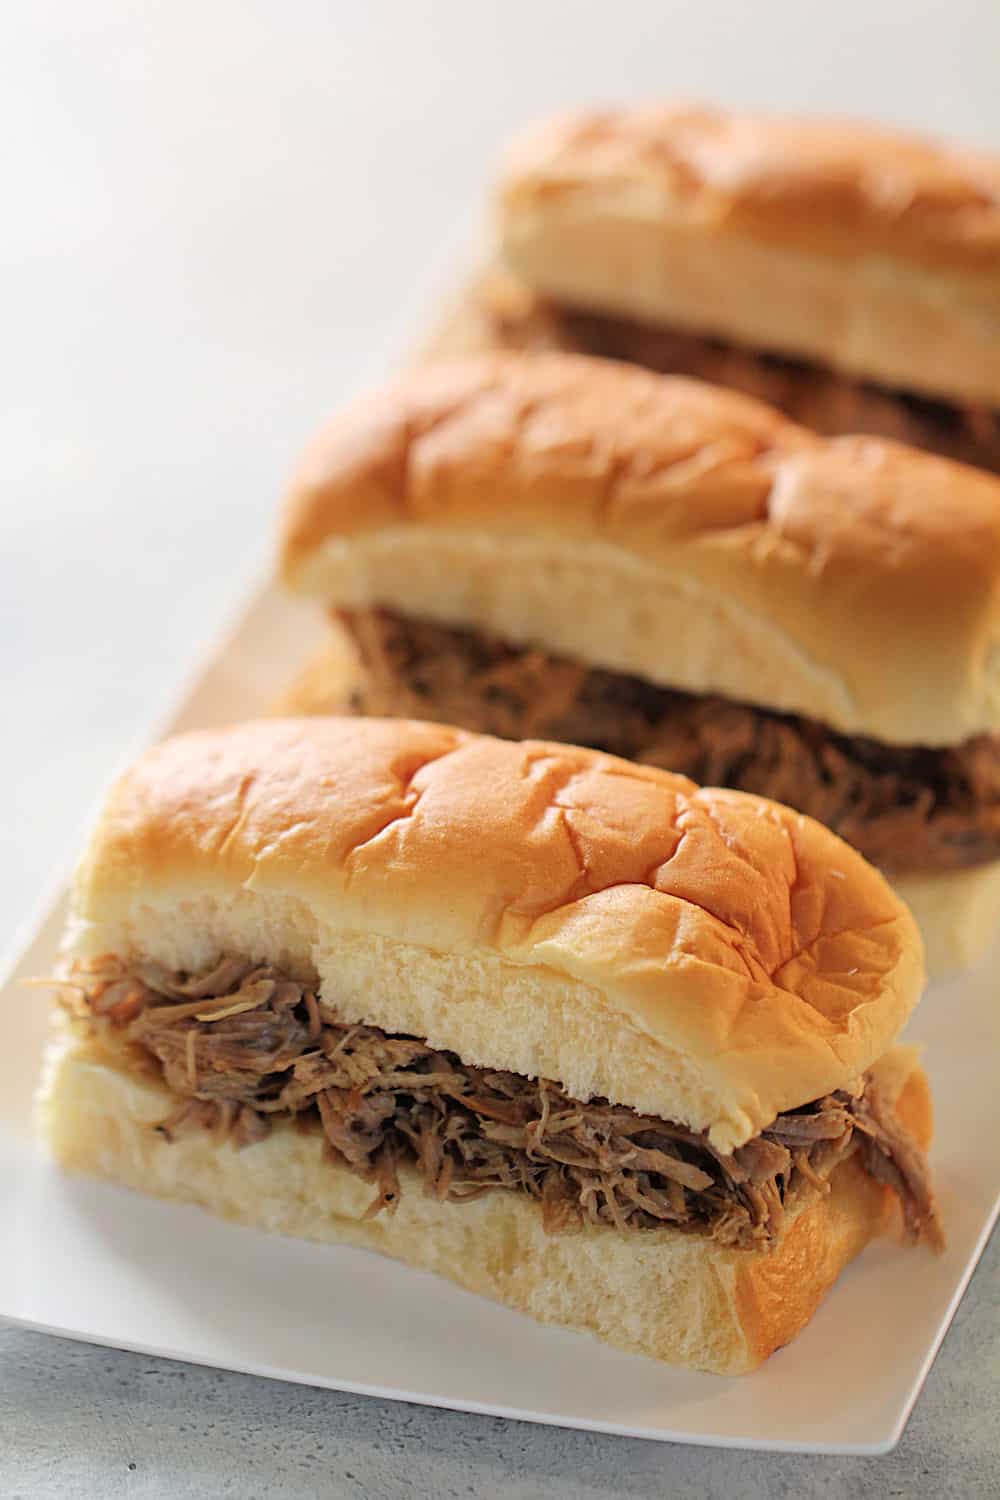 Sticky Pulled Pork Sliders - Dished by Kate